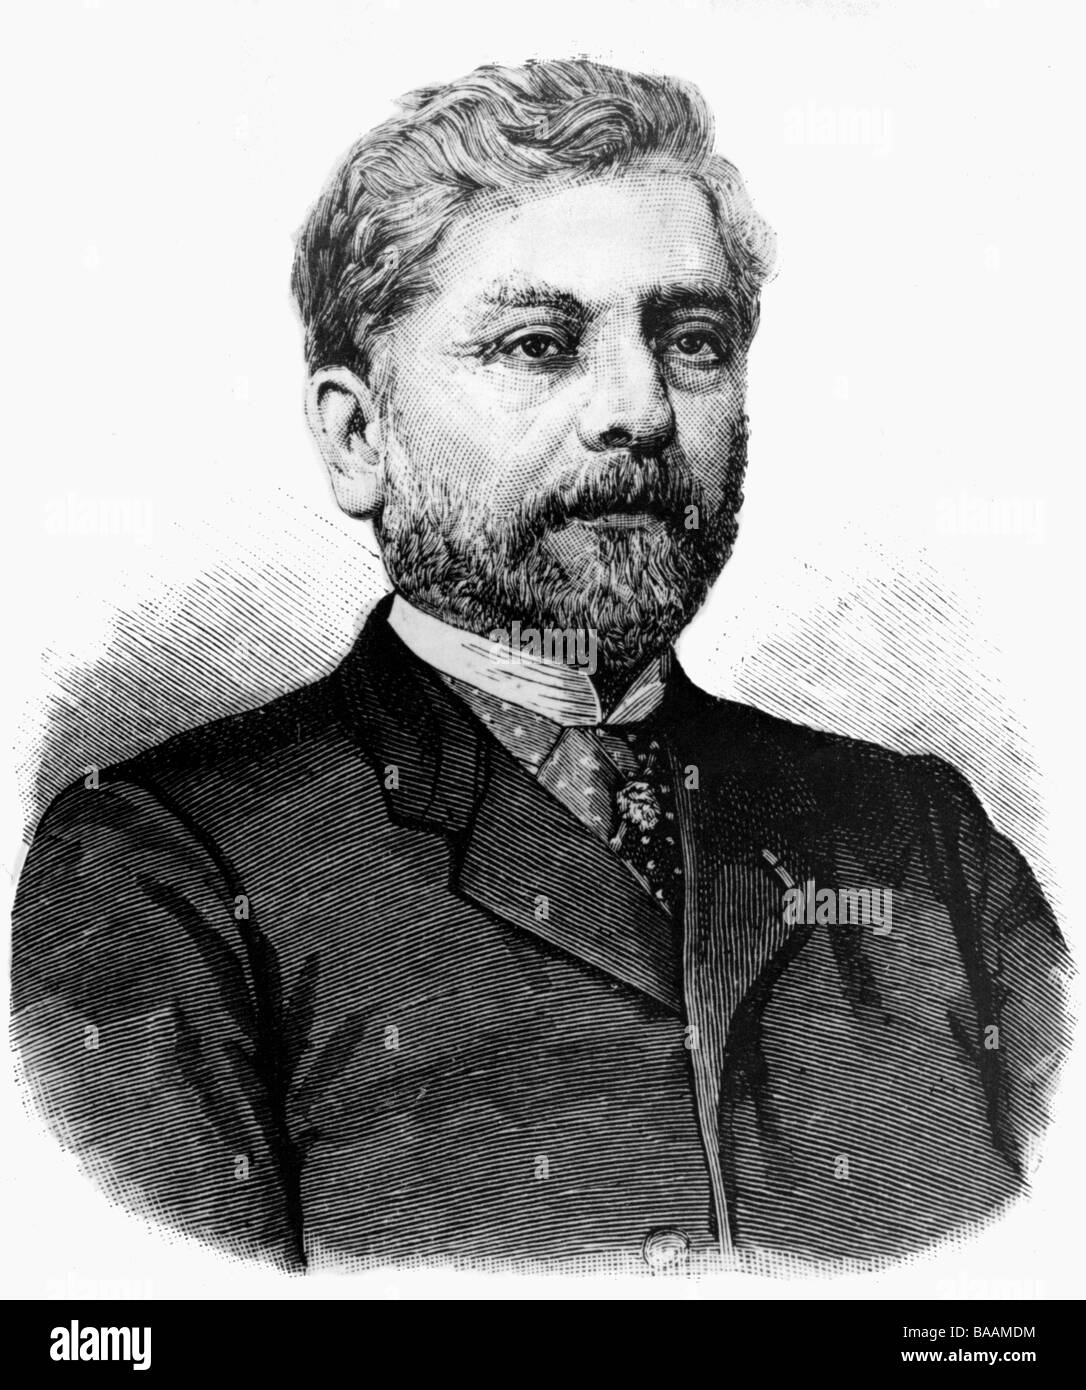 Eiffel, Alexandre Gustave, 15.12.1832 - 27.12.1923, French engineer, designer of the Eiffel Tower, portrait, wood engraving, 19th century, Stock Photo